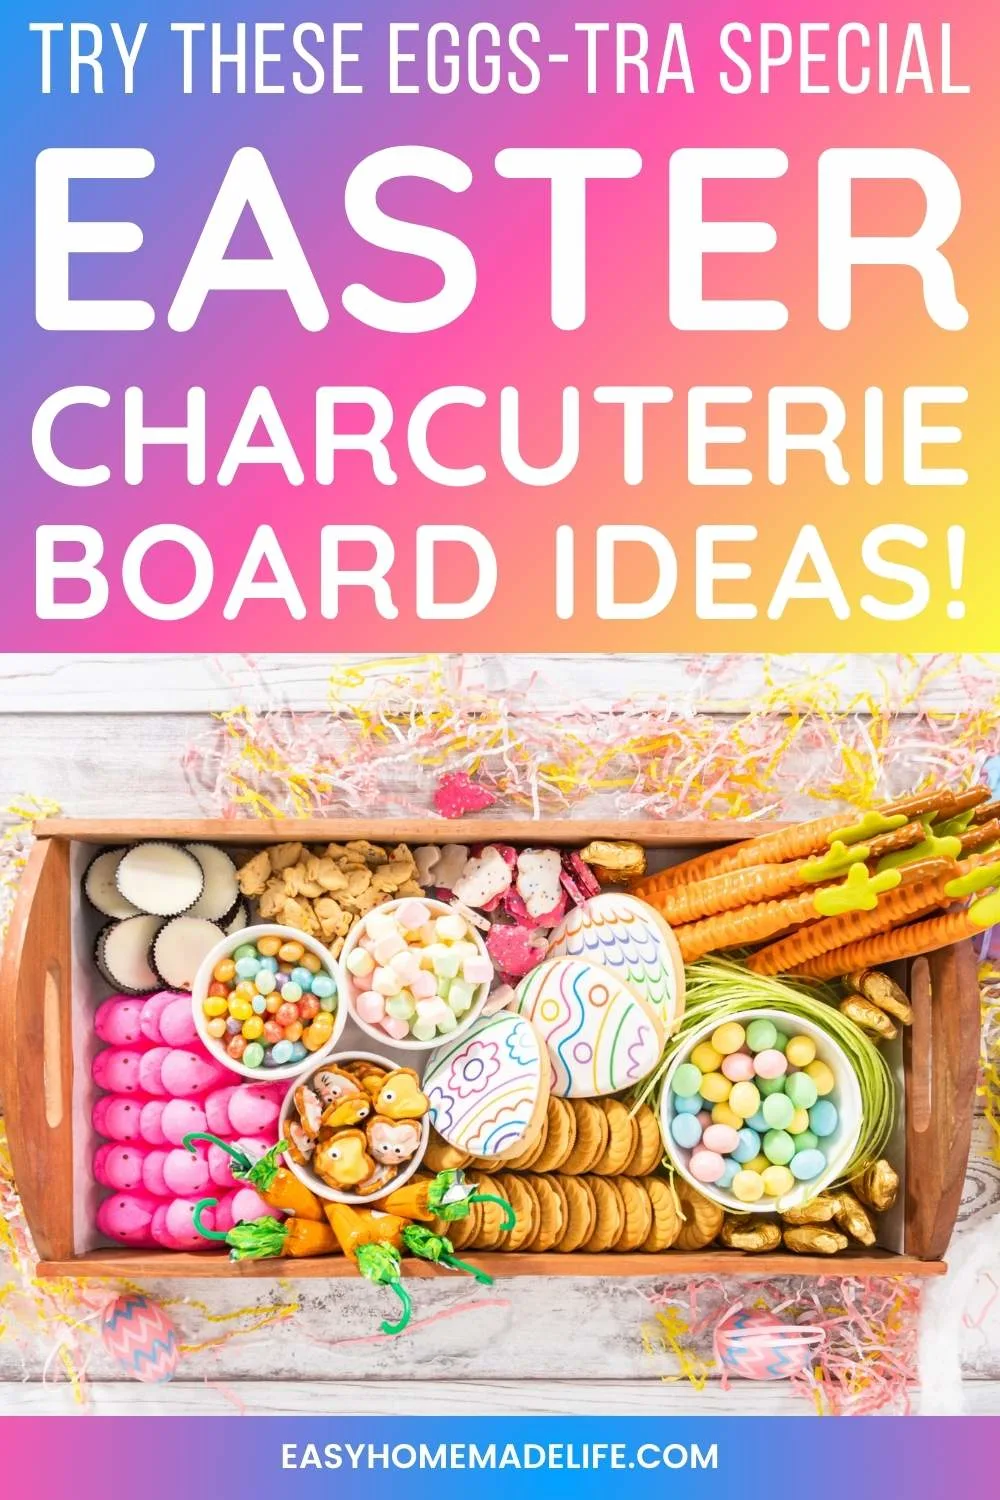 Try these eggs-tra special Easter charcuterie board ideas!